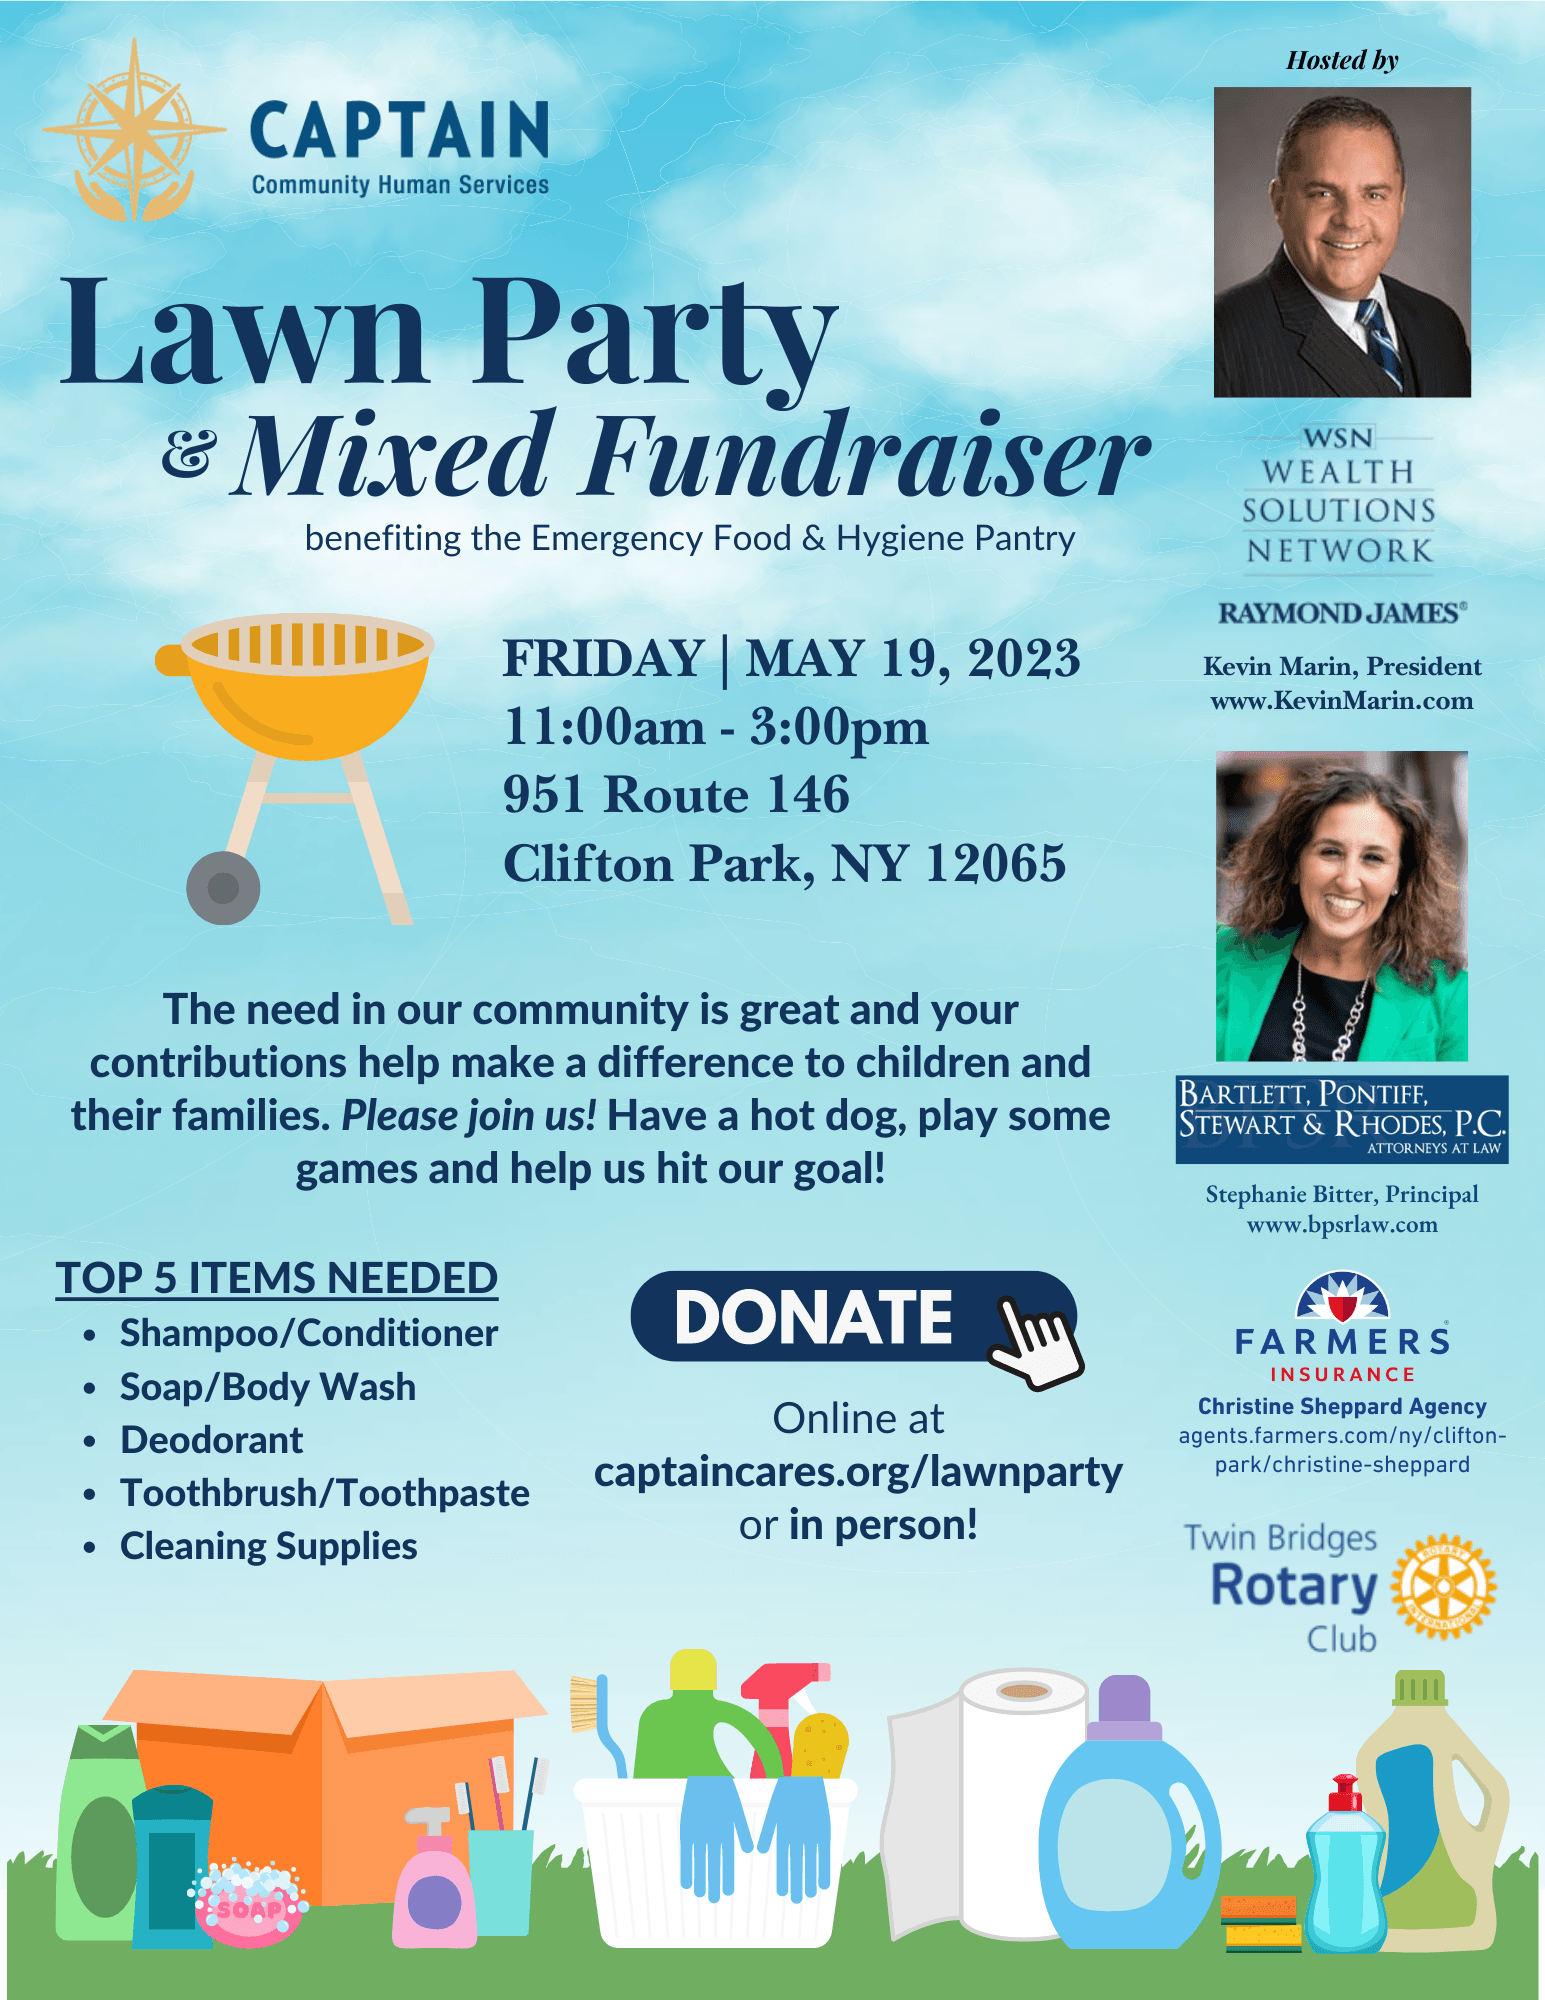 Join us for a Lawn Party + Mixed Fundraiser on May 19th!